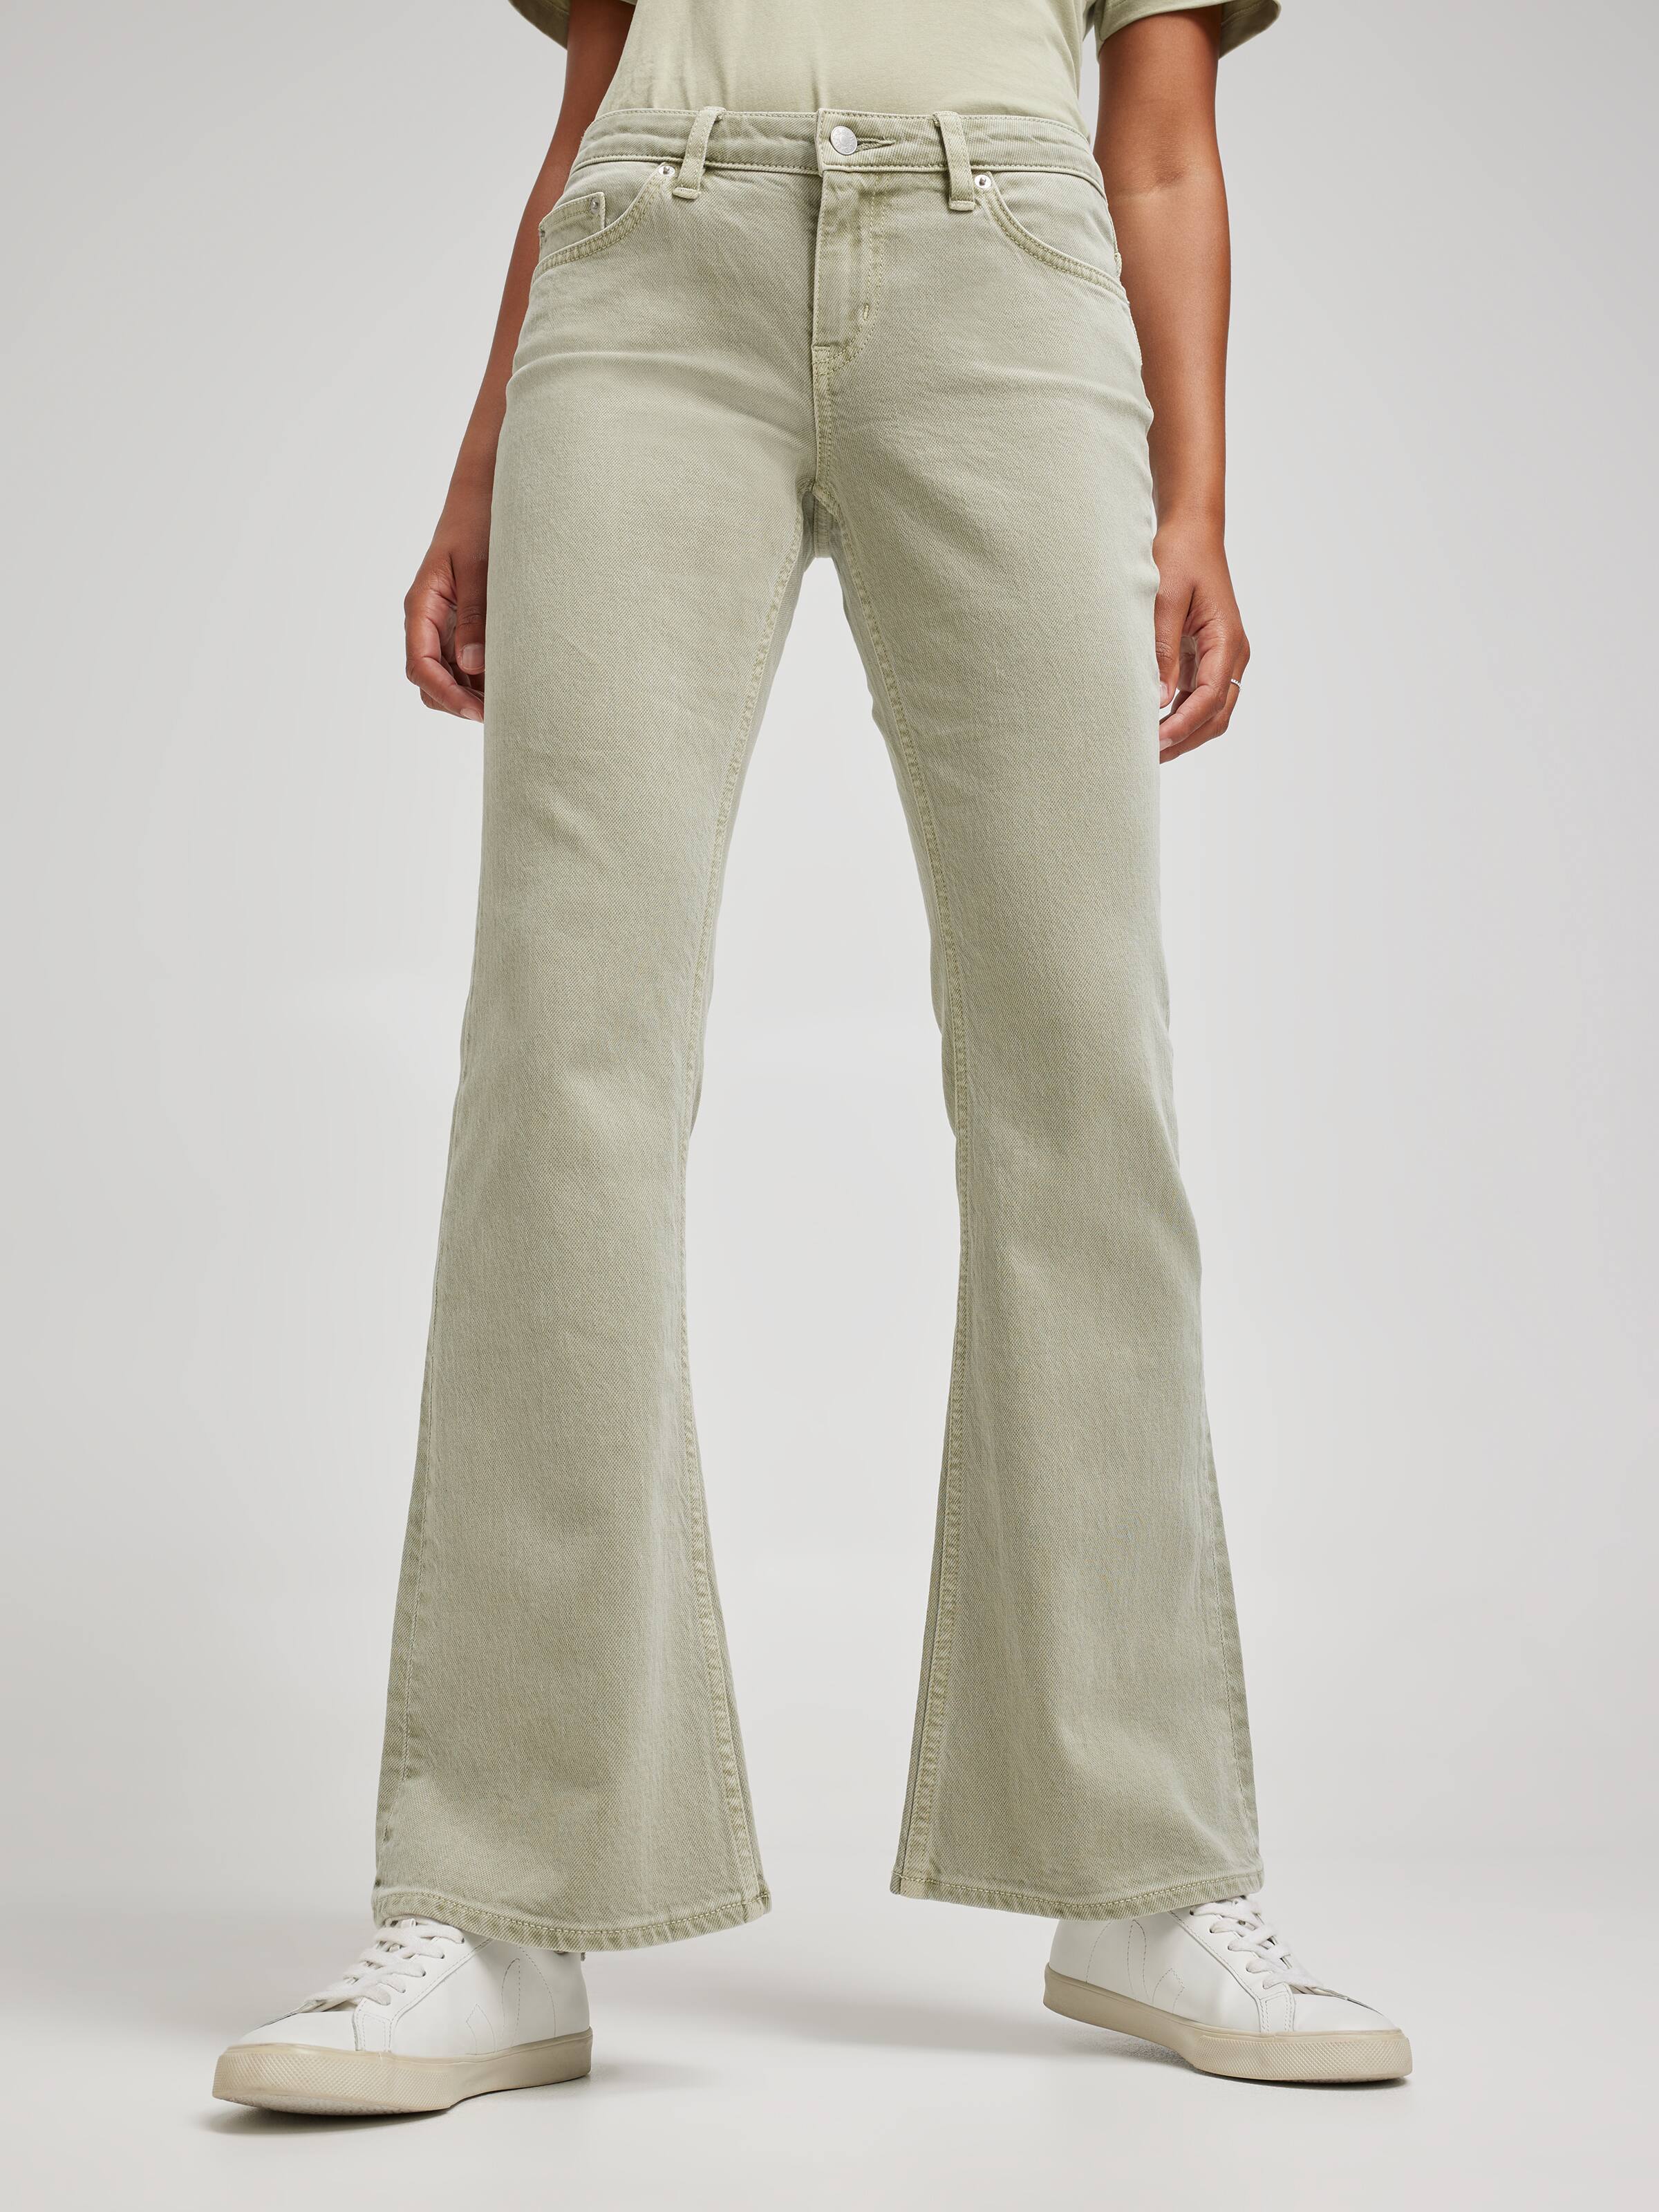 Low Vintage Flare Jean In Faded Thyme - Just Jeans Online